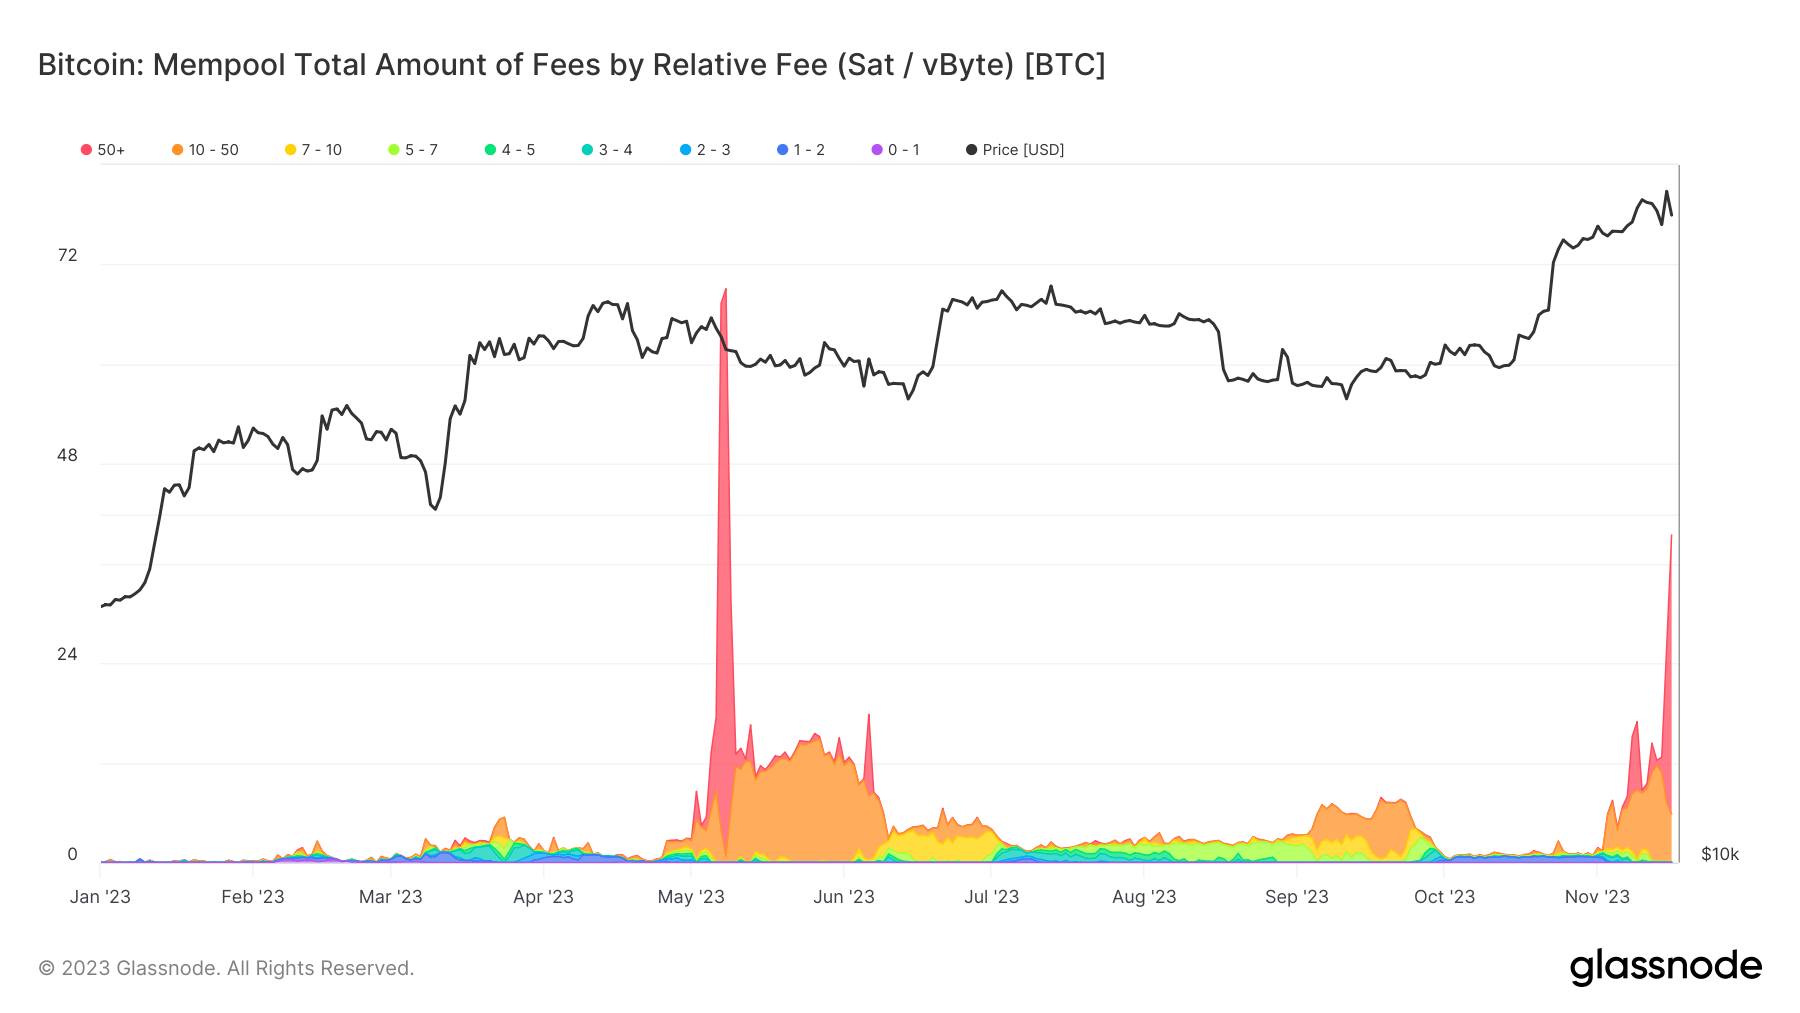 Mempool Total Amount of Fees by Relative Fee (Sat/vByte)